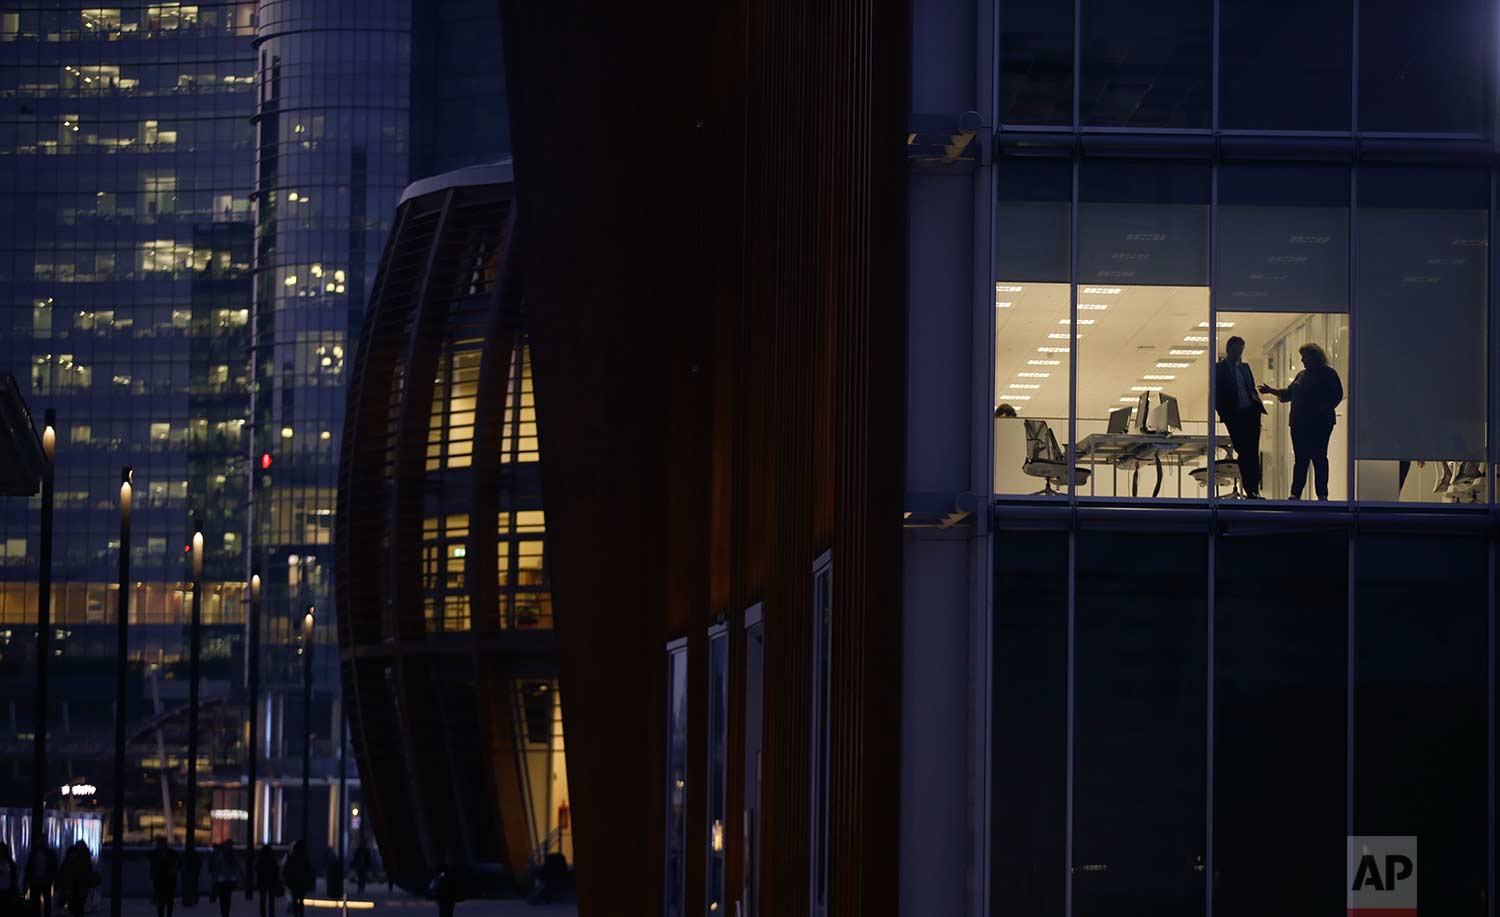  In this Wednesday, Oct. 18, 2017 photo, people are silhouetted behind the windows of an office, in Milan's Porta Nuova business district, Italy. (AP Photo/Luca Bruno) 